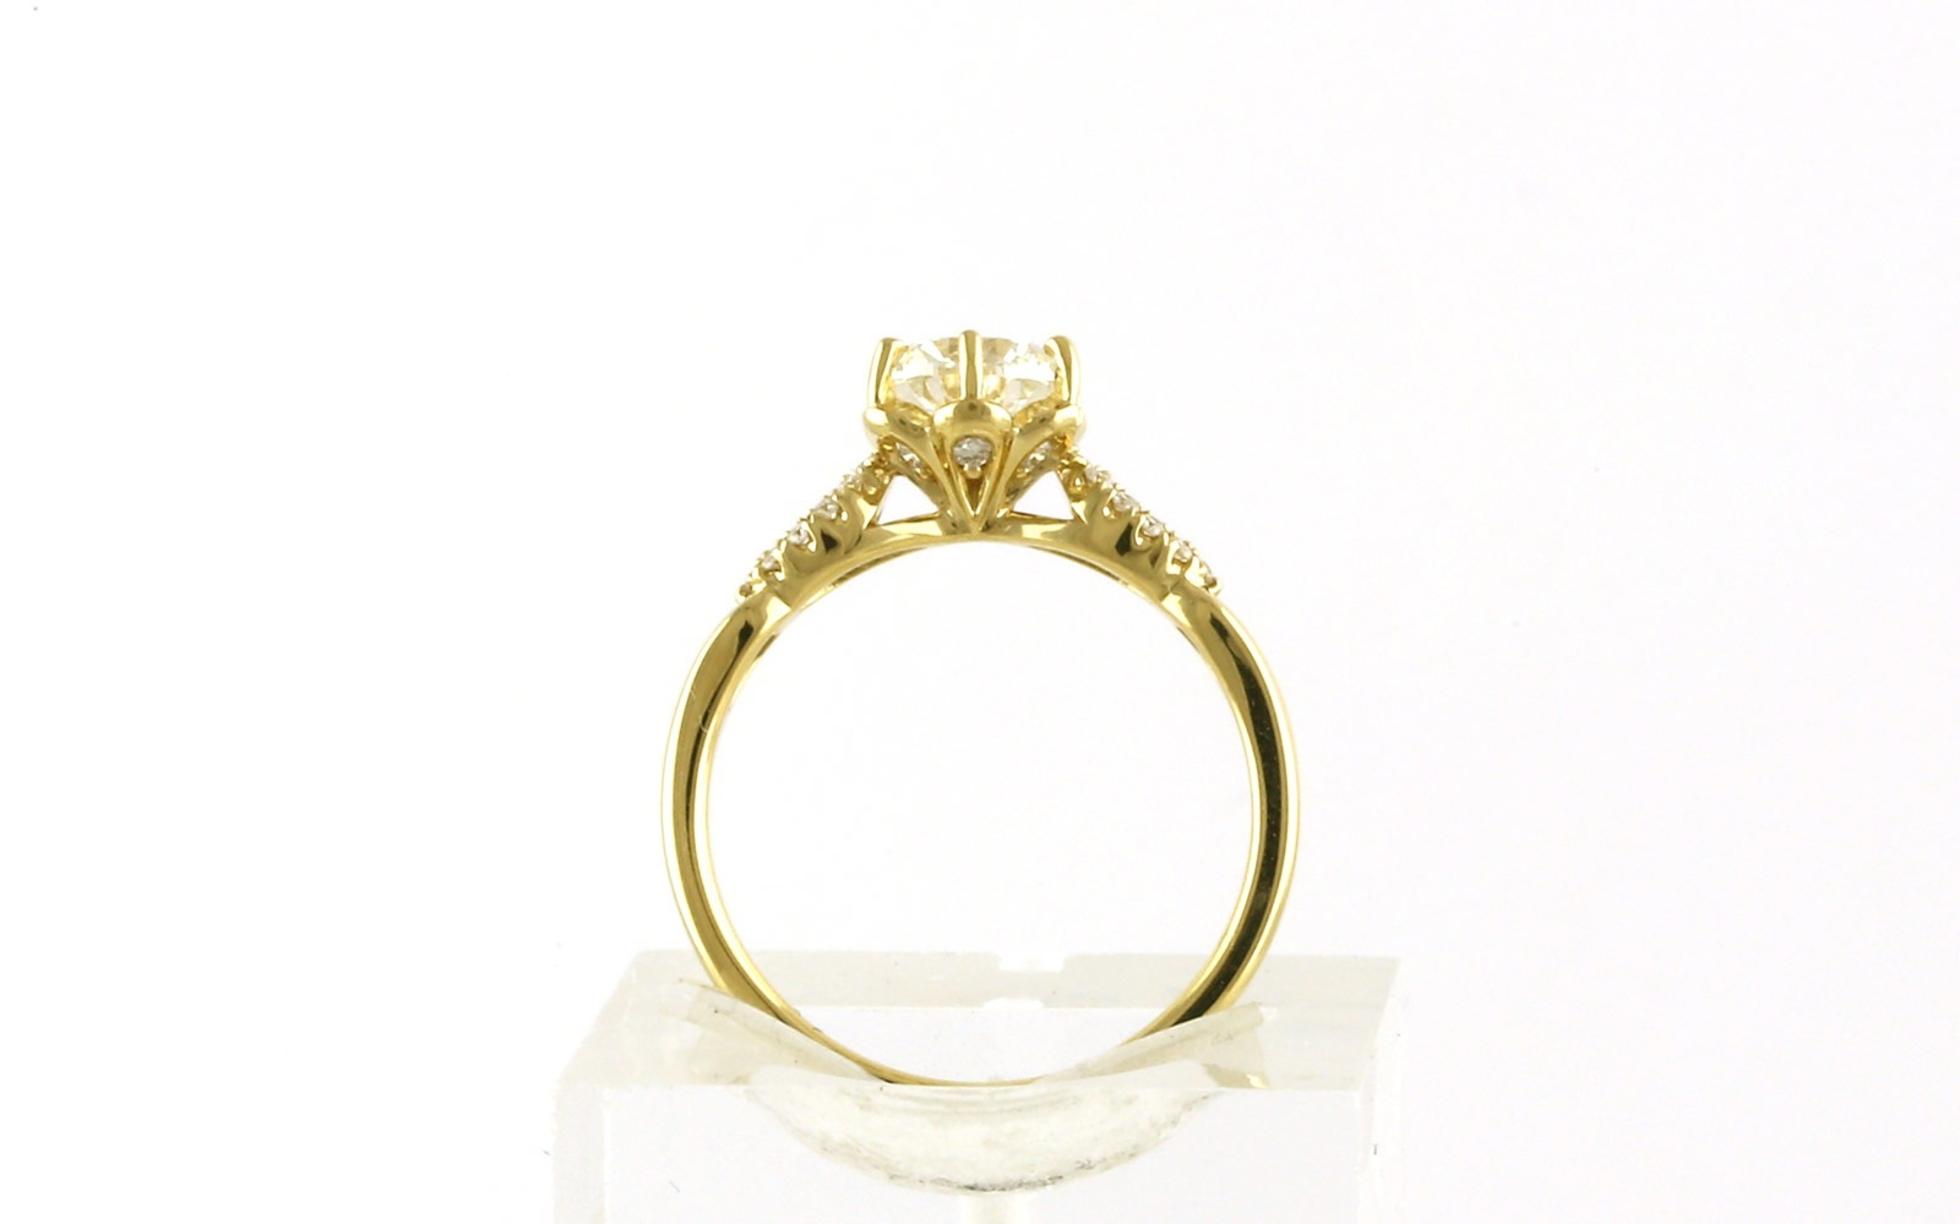 Woven Diamond Engagement Ring with Crown Prong Details in Yellow Gold (1.15cts TWT) side